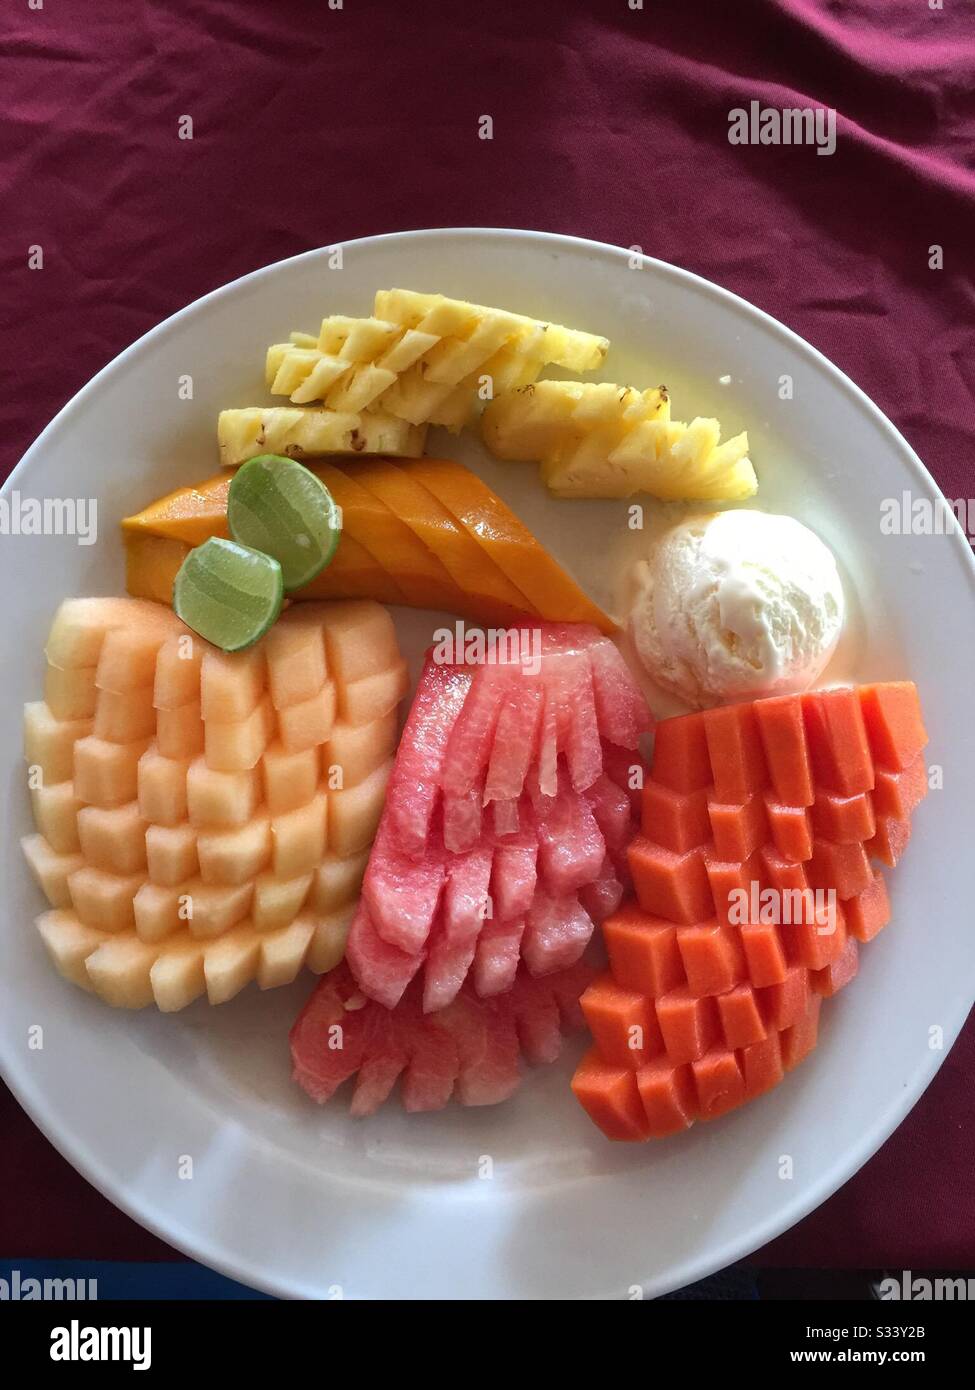 Fruit platter and ice cream in Bali Stock Photo